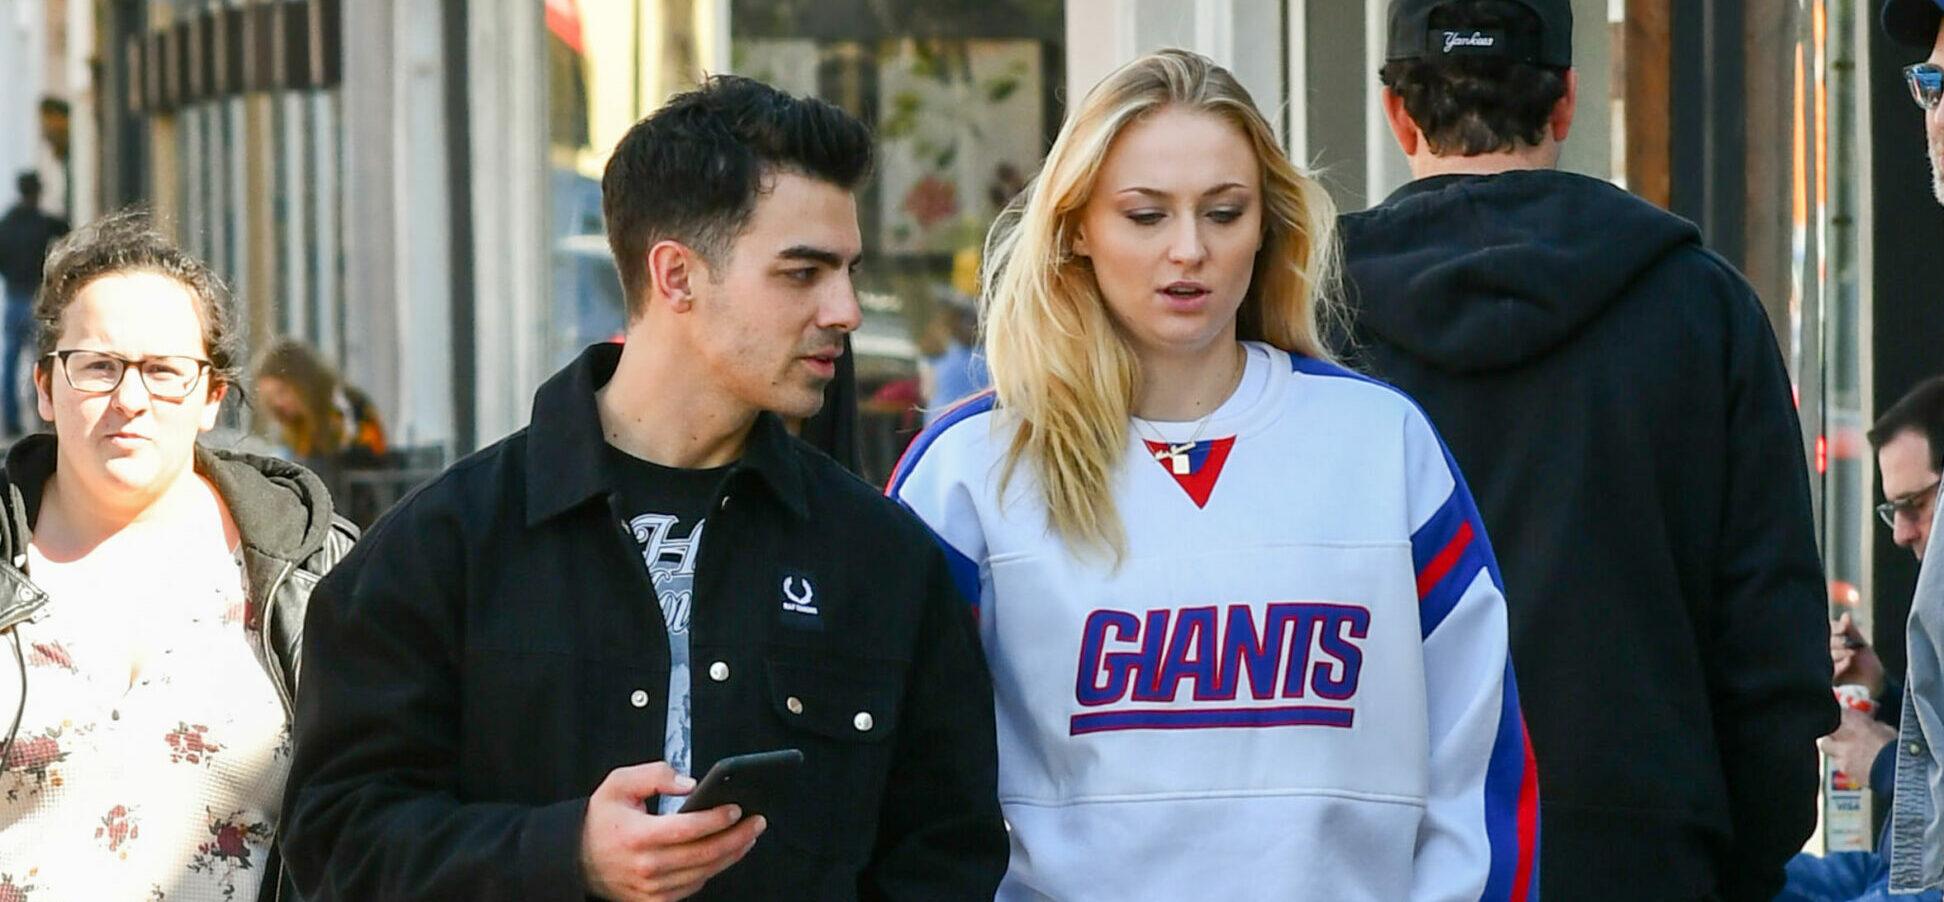 Sophie Turner and Joe Jonas out and about